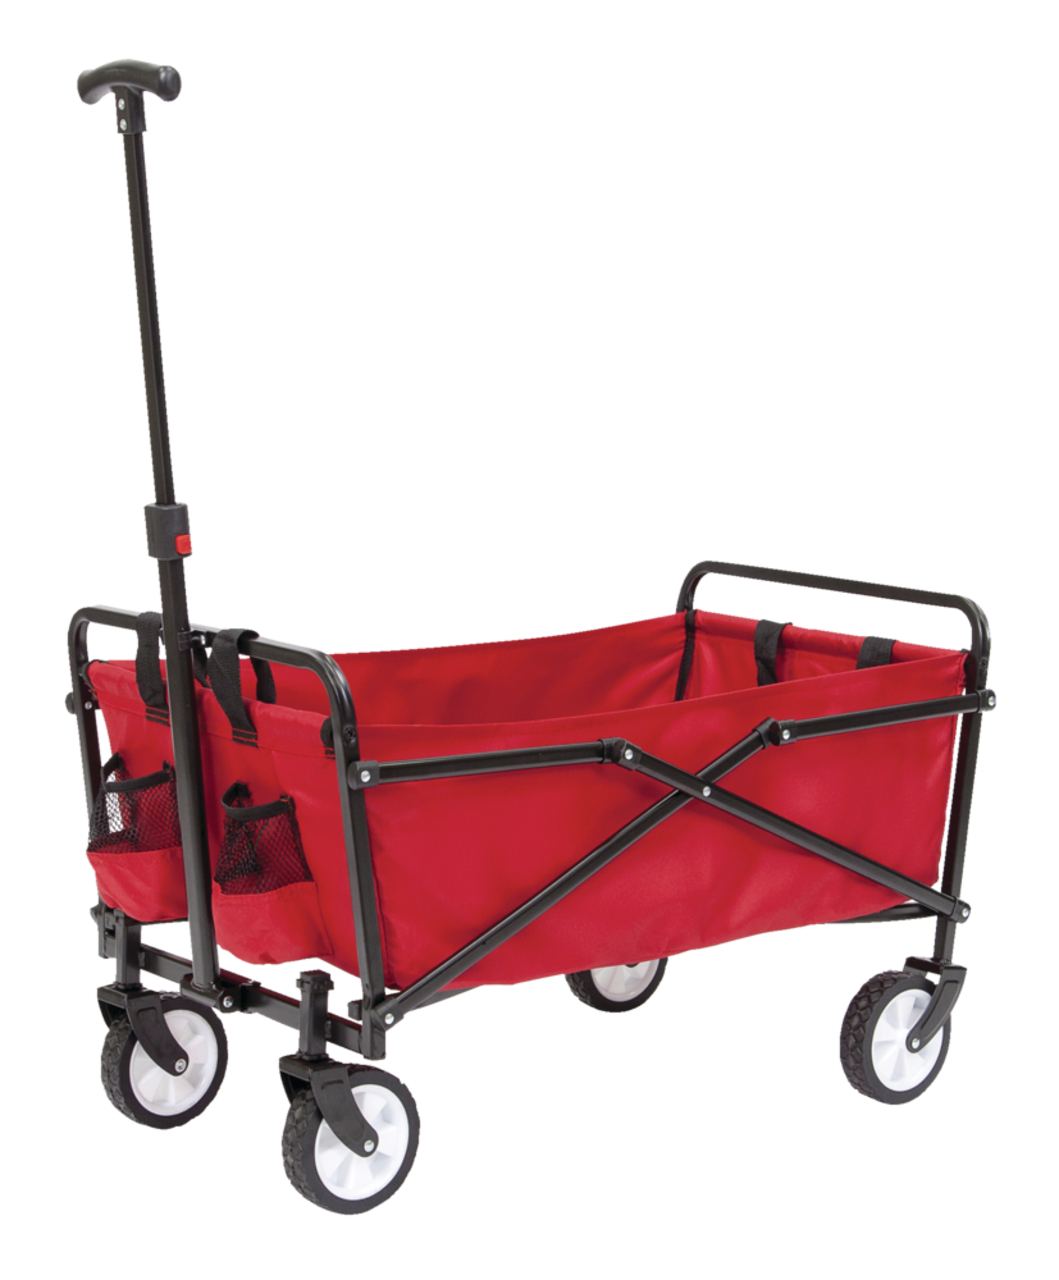 Seina Outdoor Collapsible Folding Utility Wagon w/ Cup Holders, 150 lb  Capacity